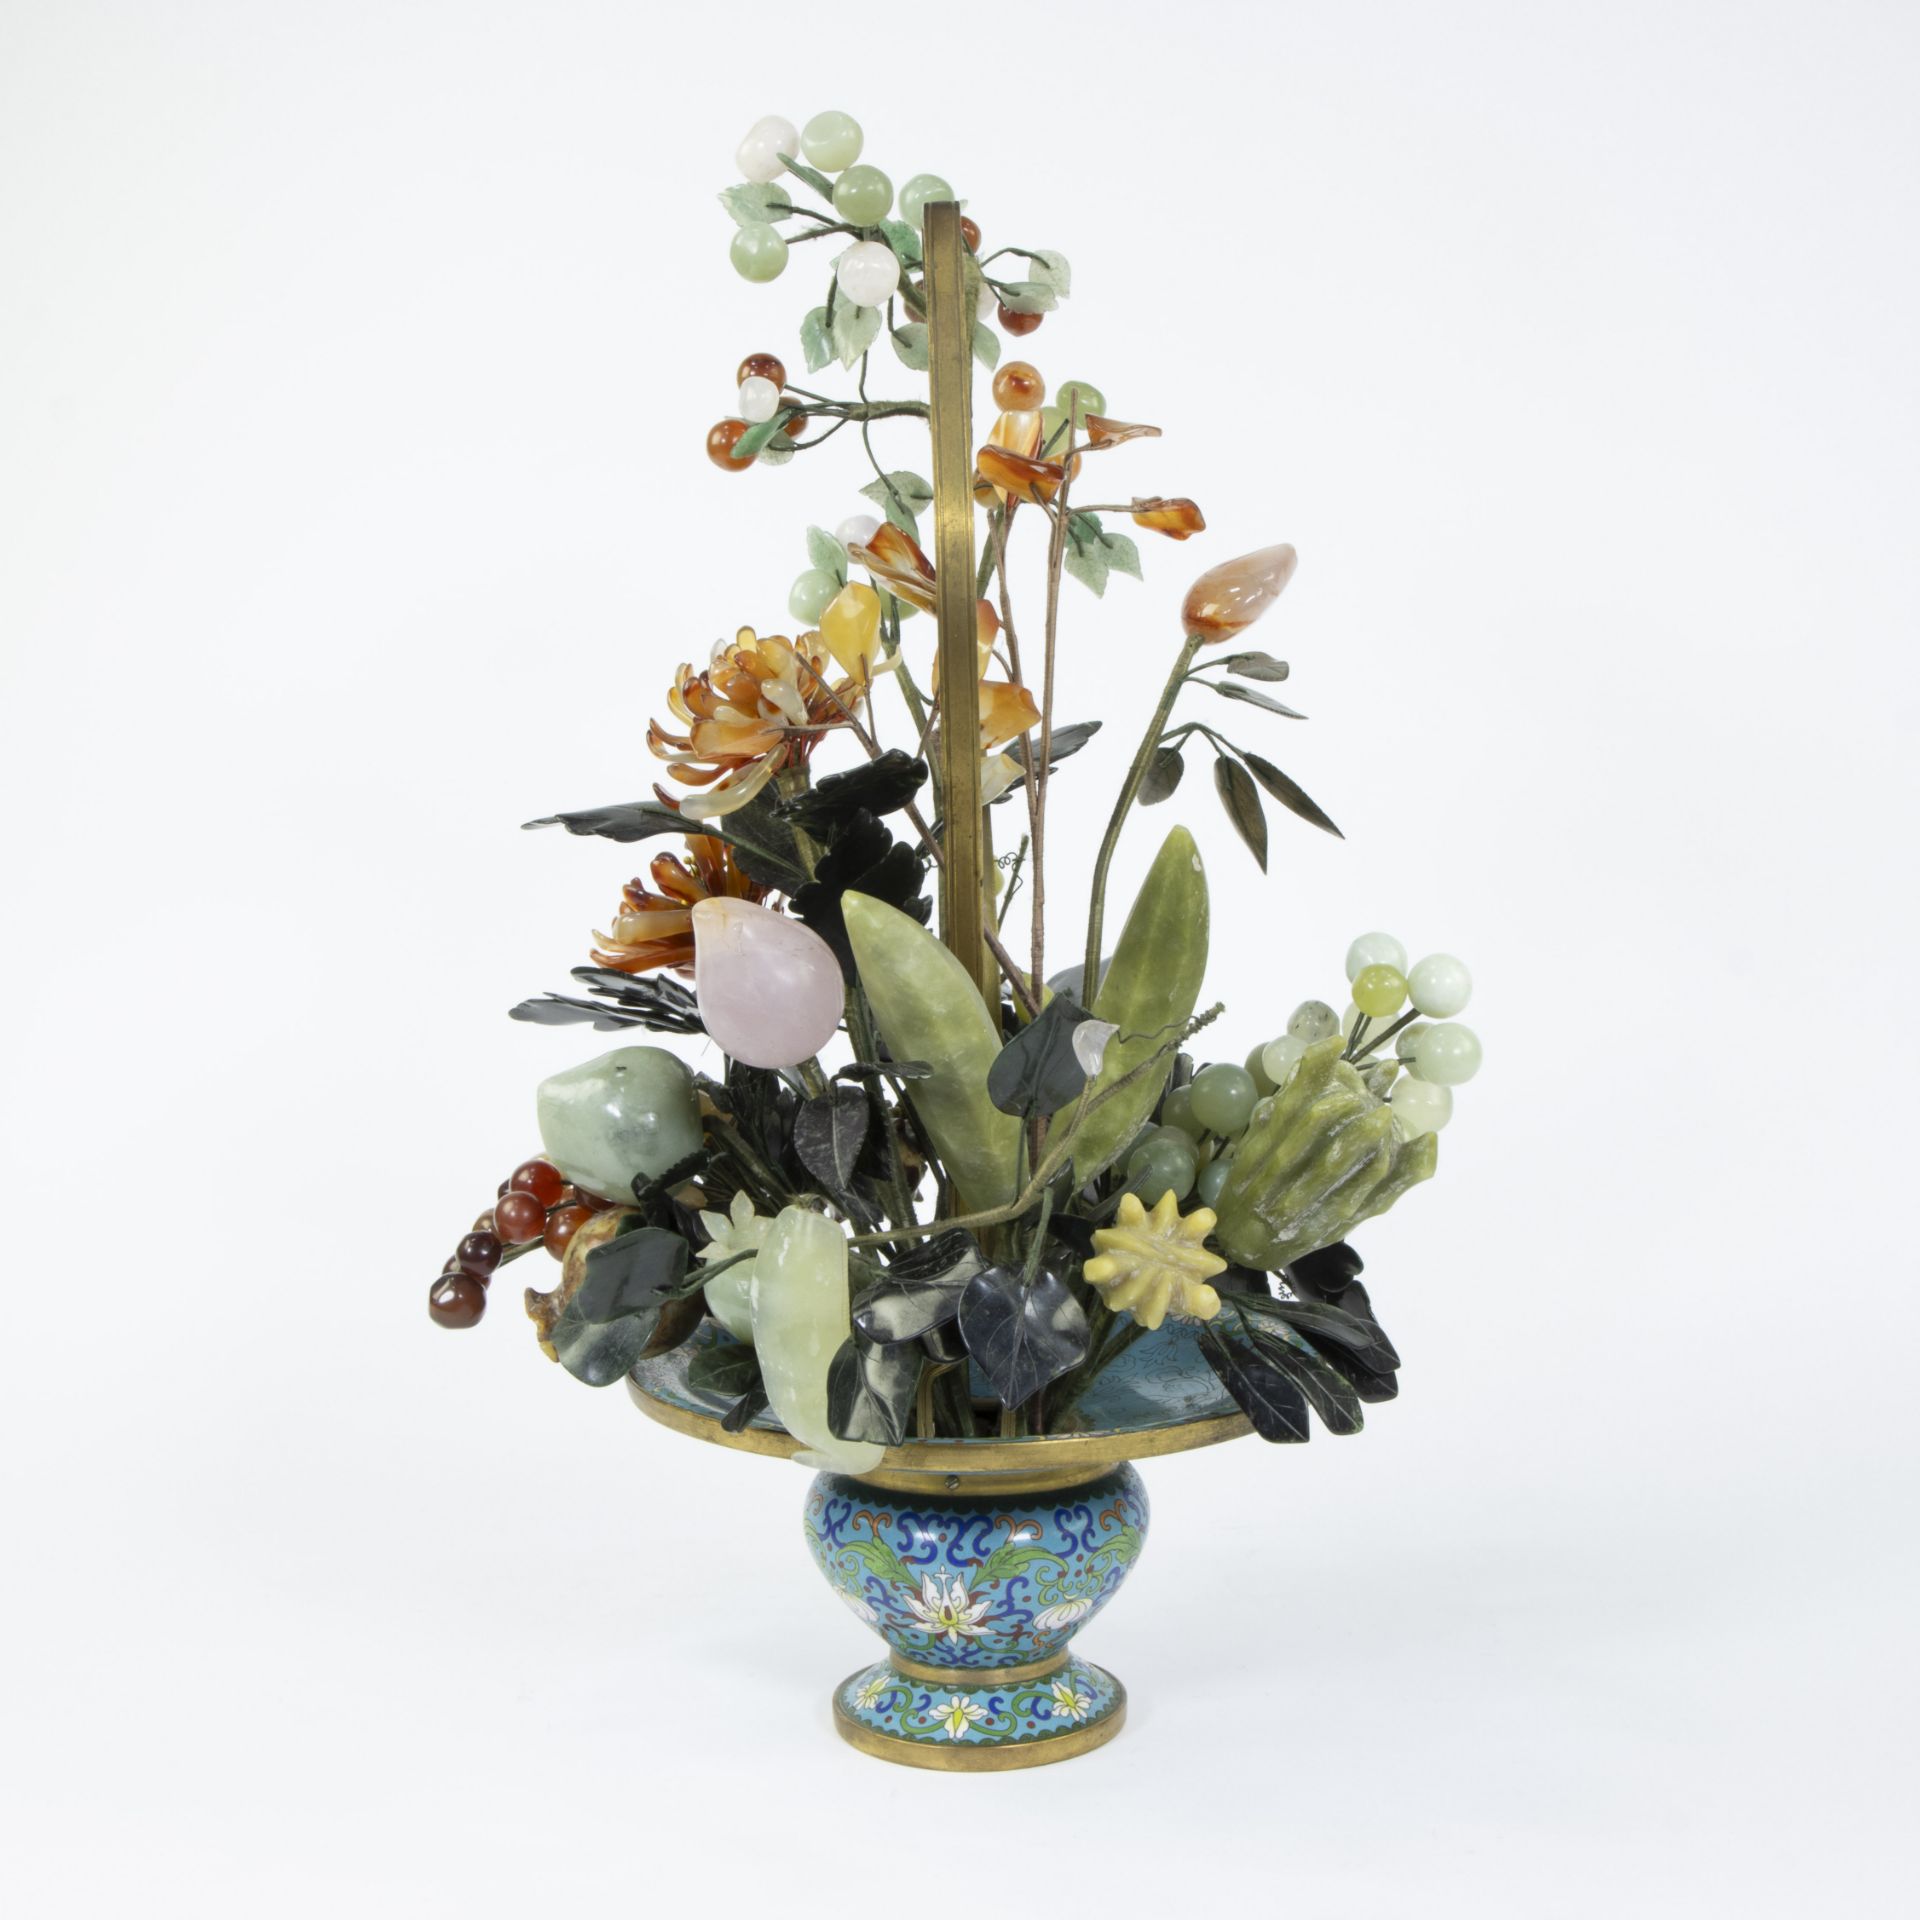 Gilt bronze Chinese cloisonne pot with a floral arrangement of hand-carved quartz glass, carnelian, - Image 2 of 4